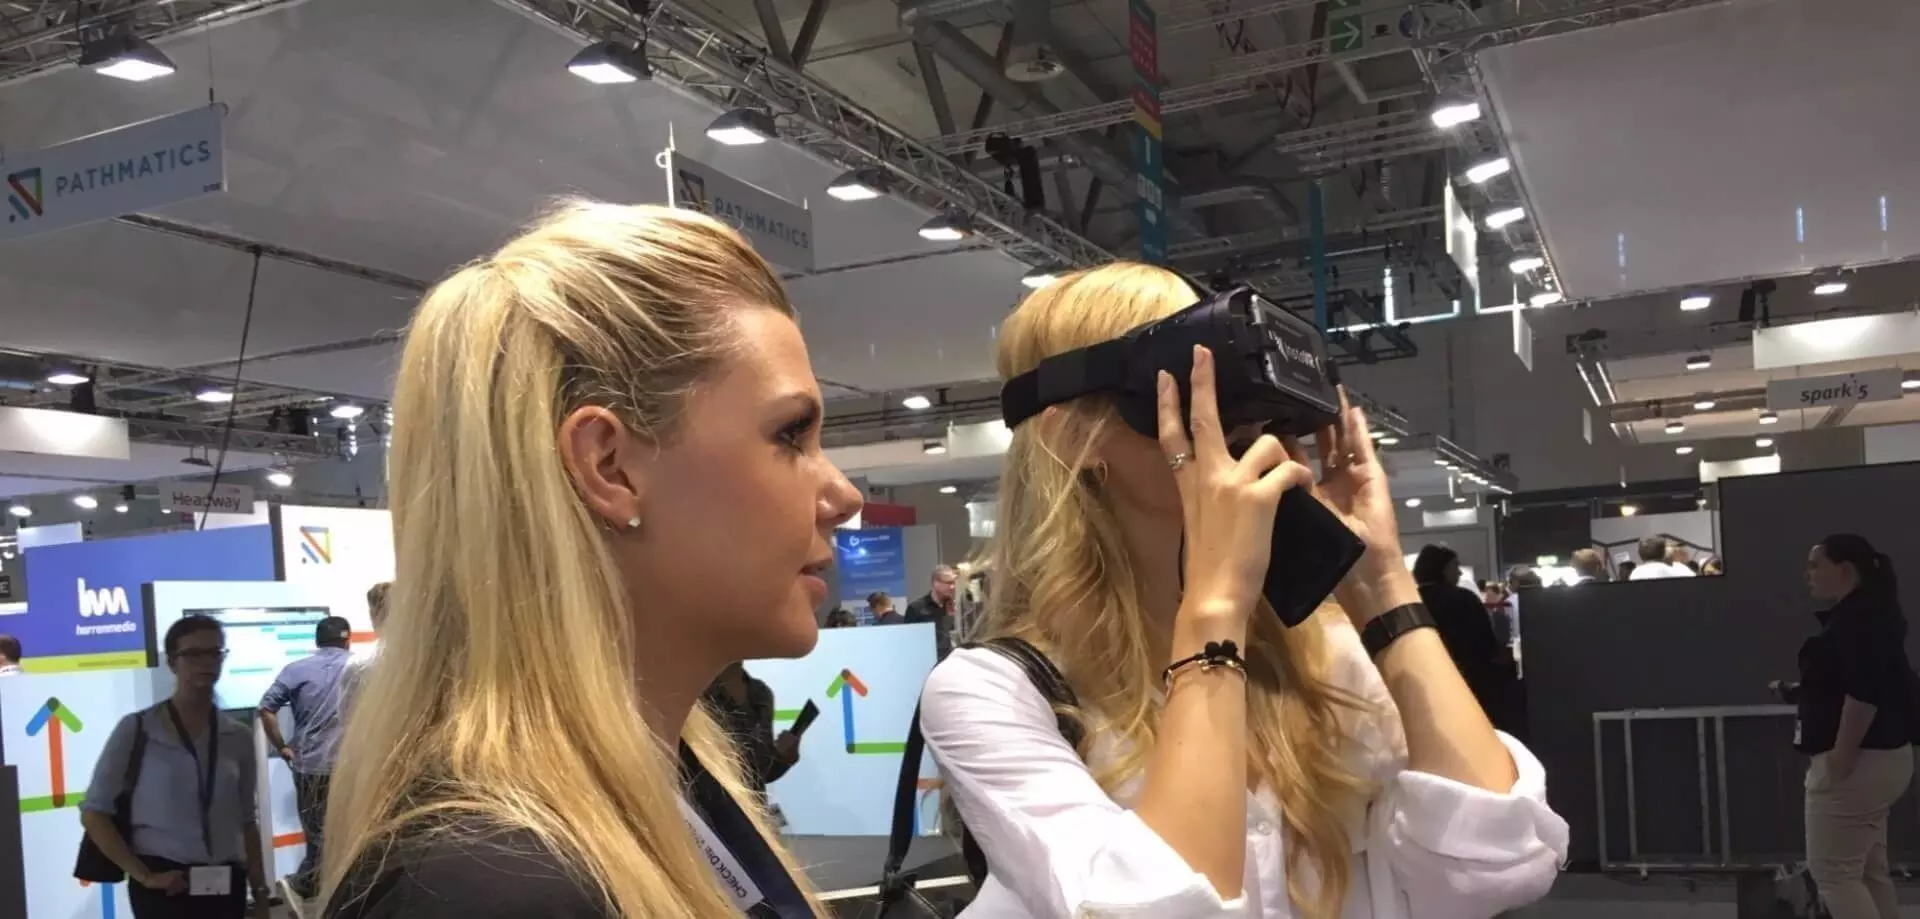 5 Benefits of Using 360 Video For Your Next Trade Show Exhibit